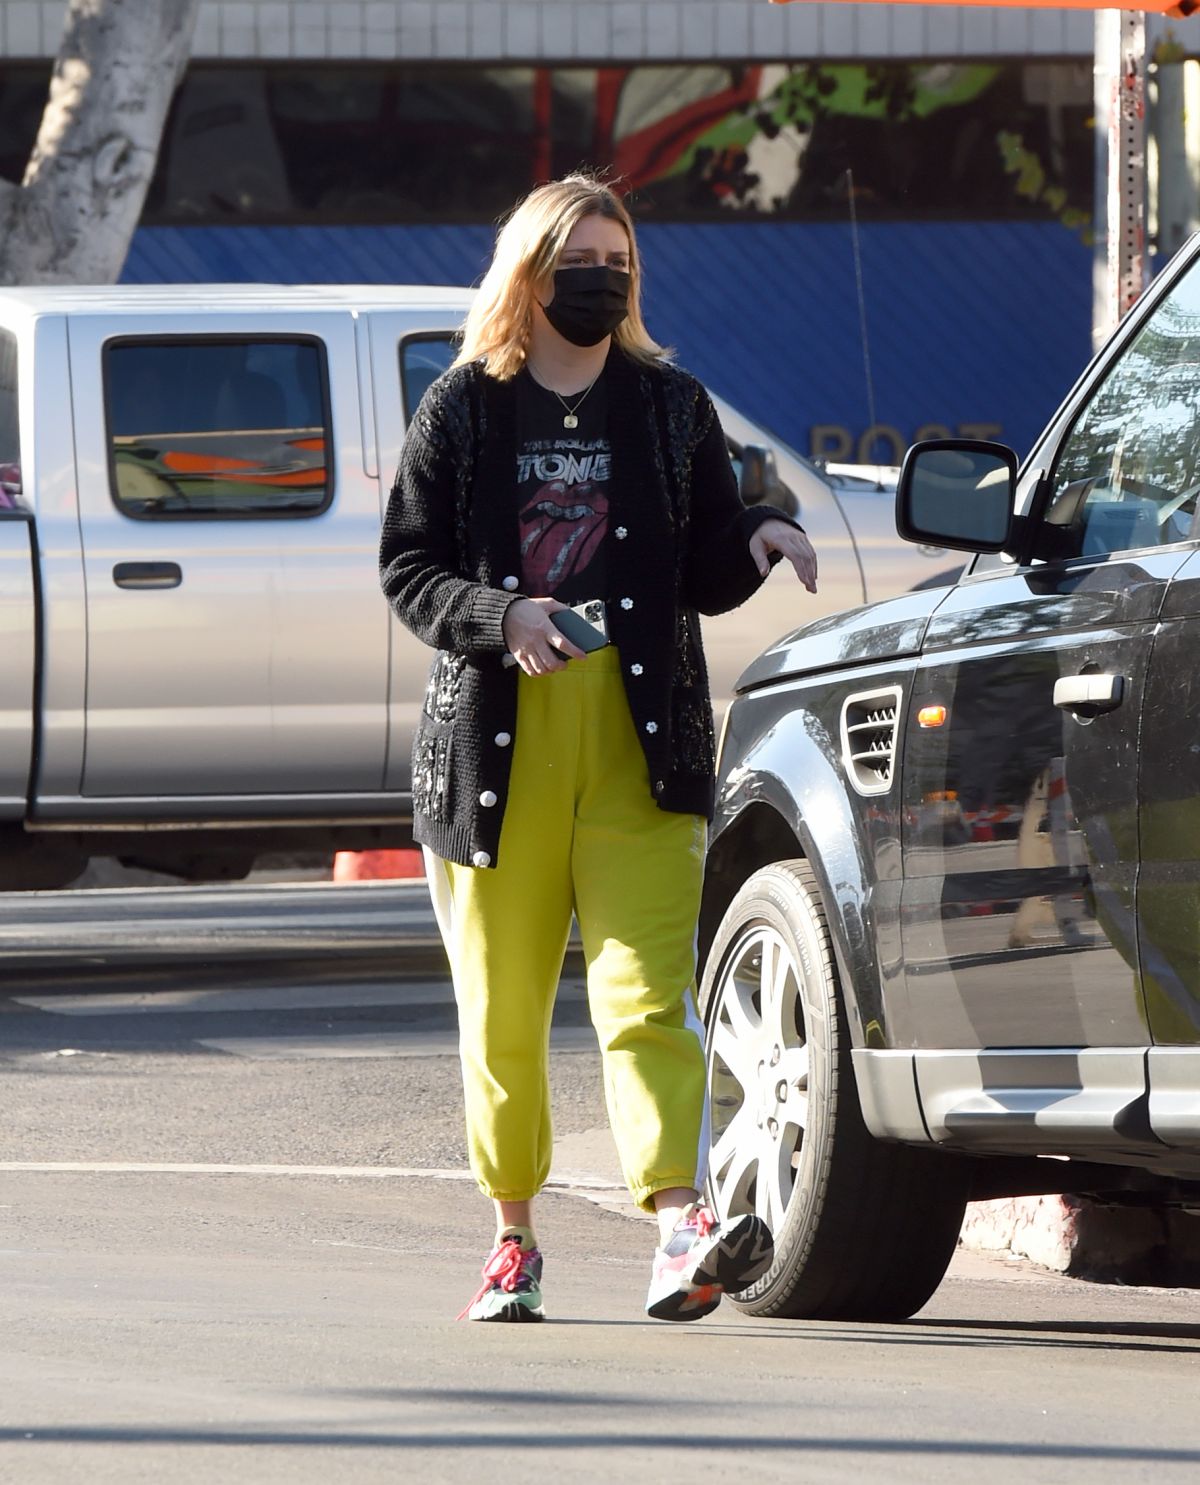 mischa-barton-picking-up-food-to-go-in-los-angeles-11-11-2020-7.jpg